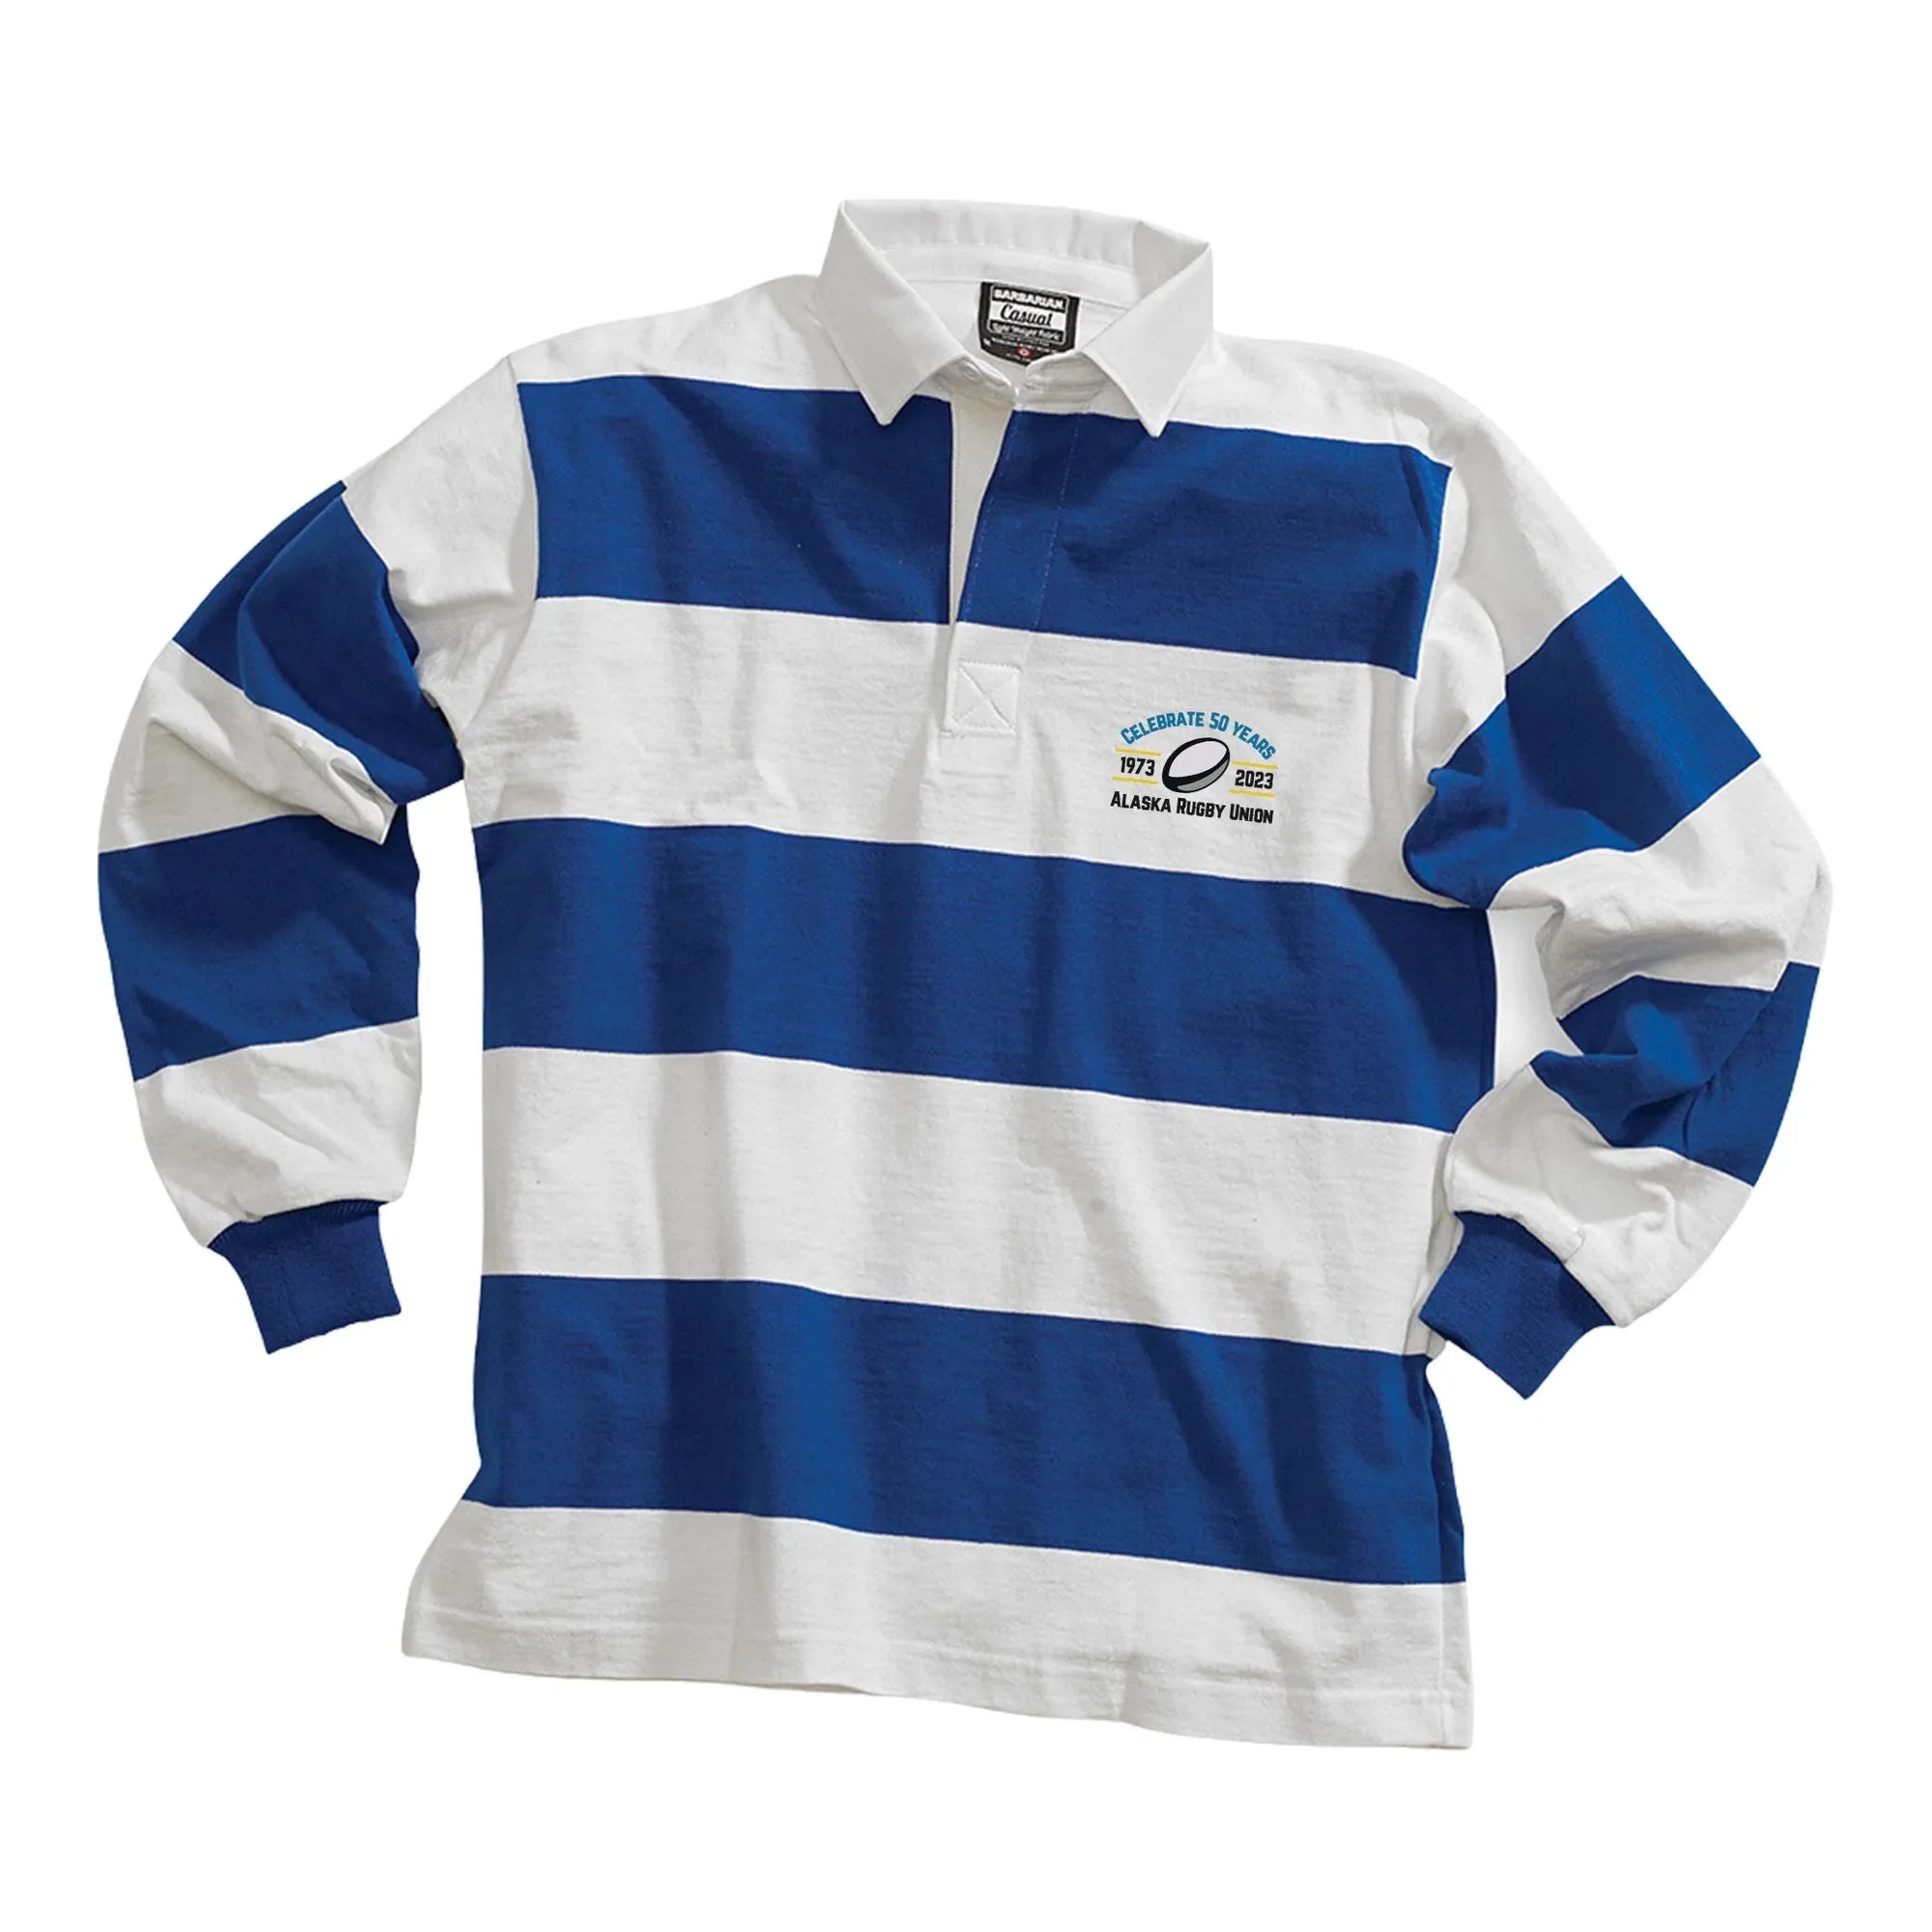 Rugby Imports AKRU 50th Anniv. Casual Weight Stripe Jersey